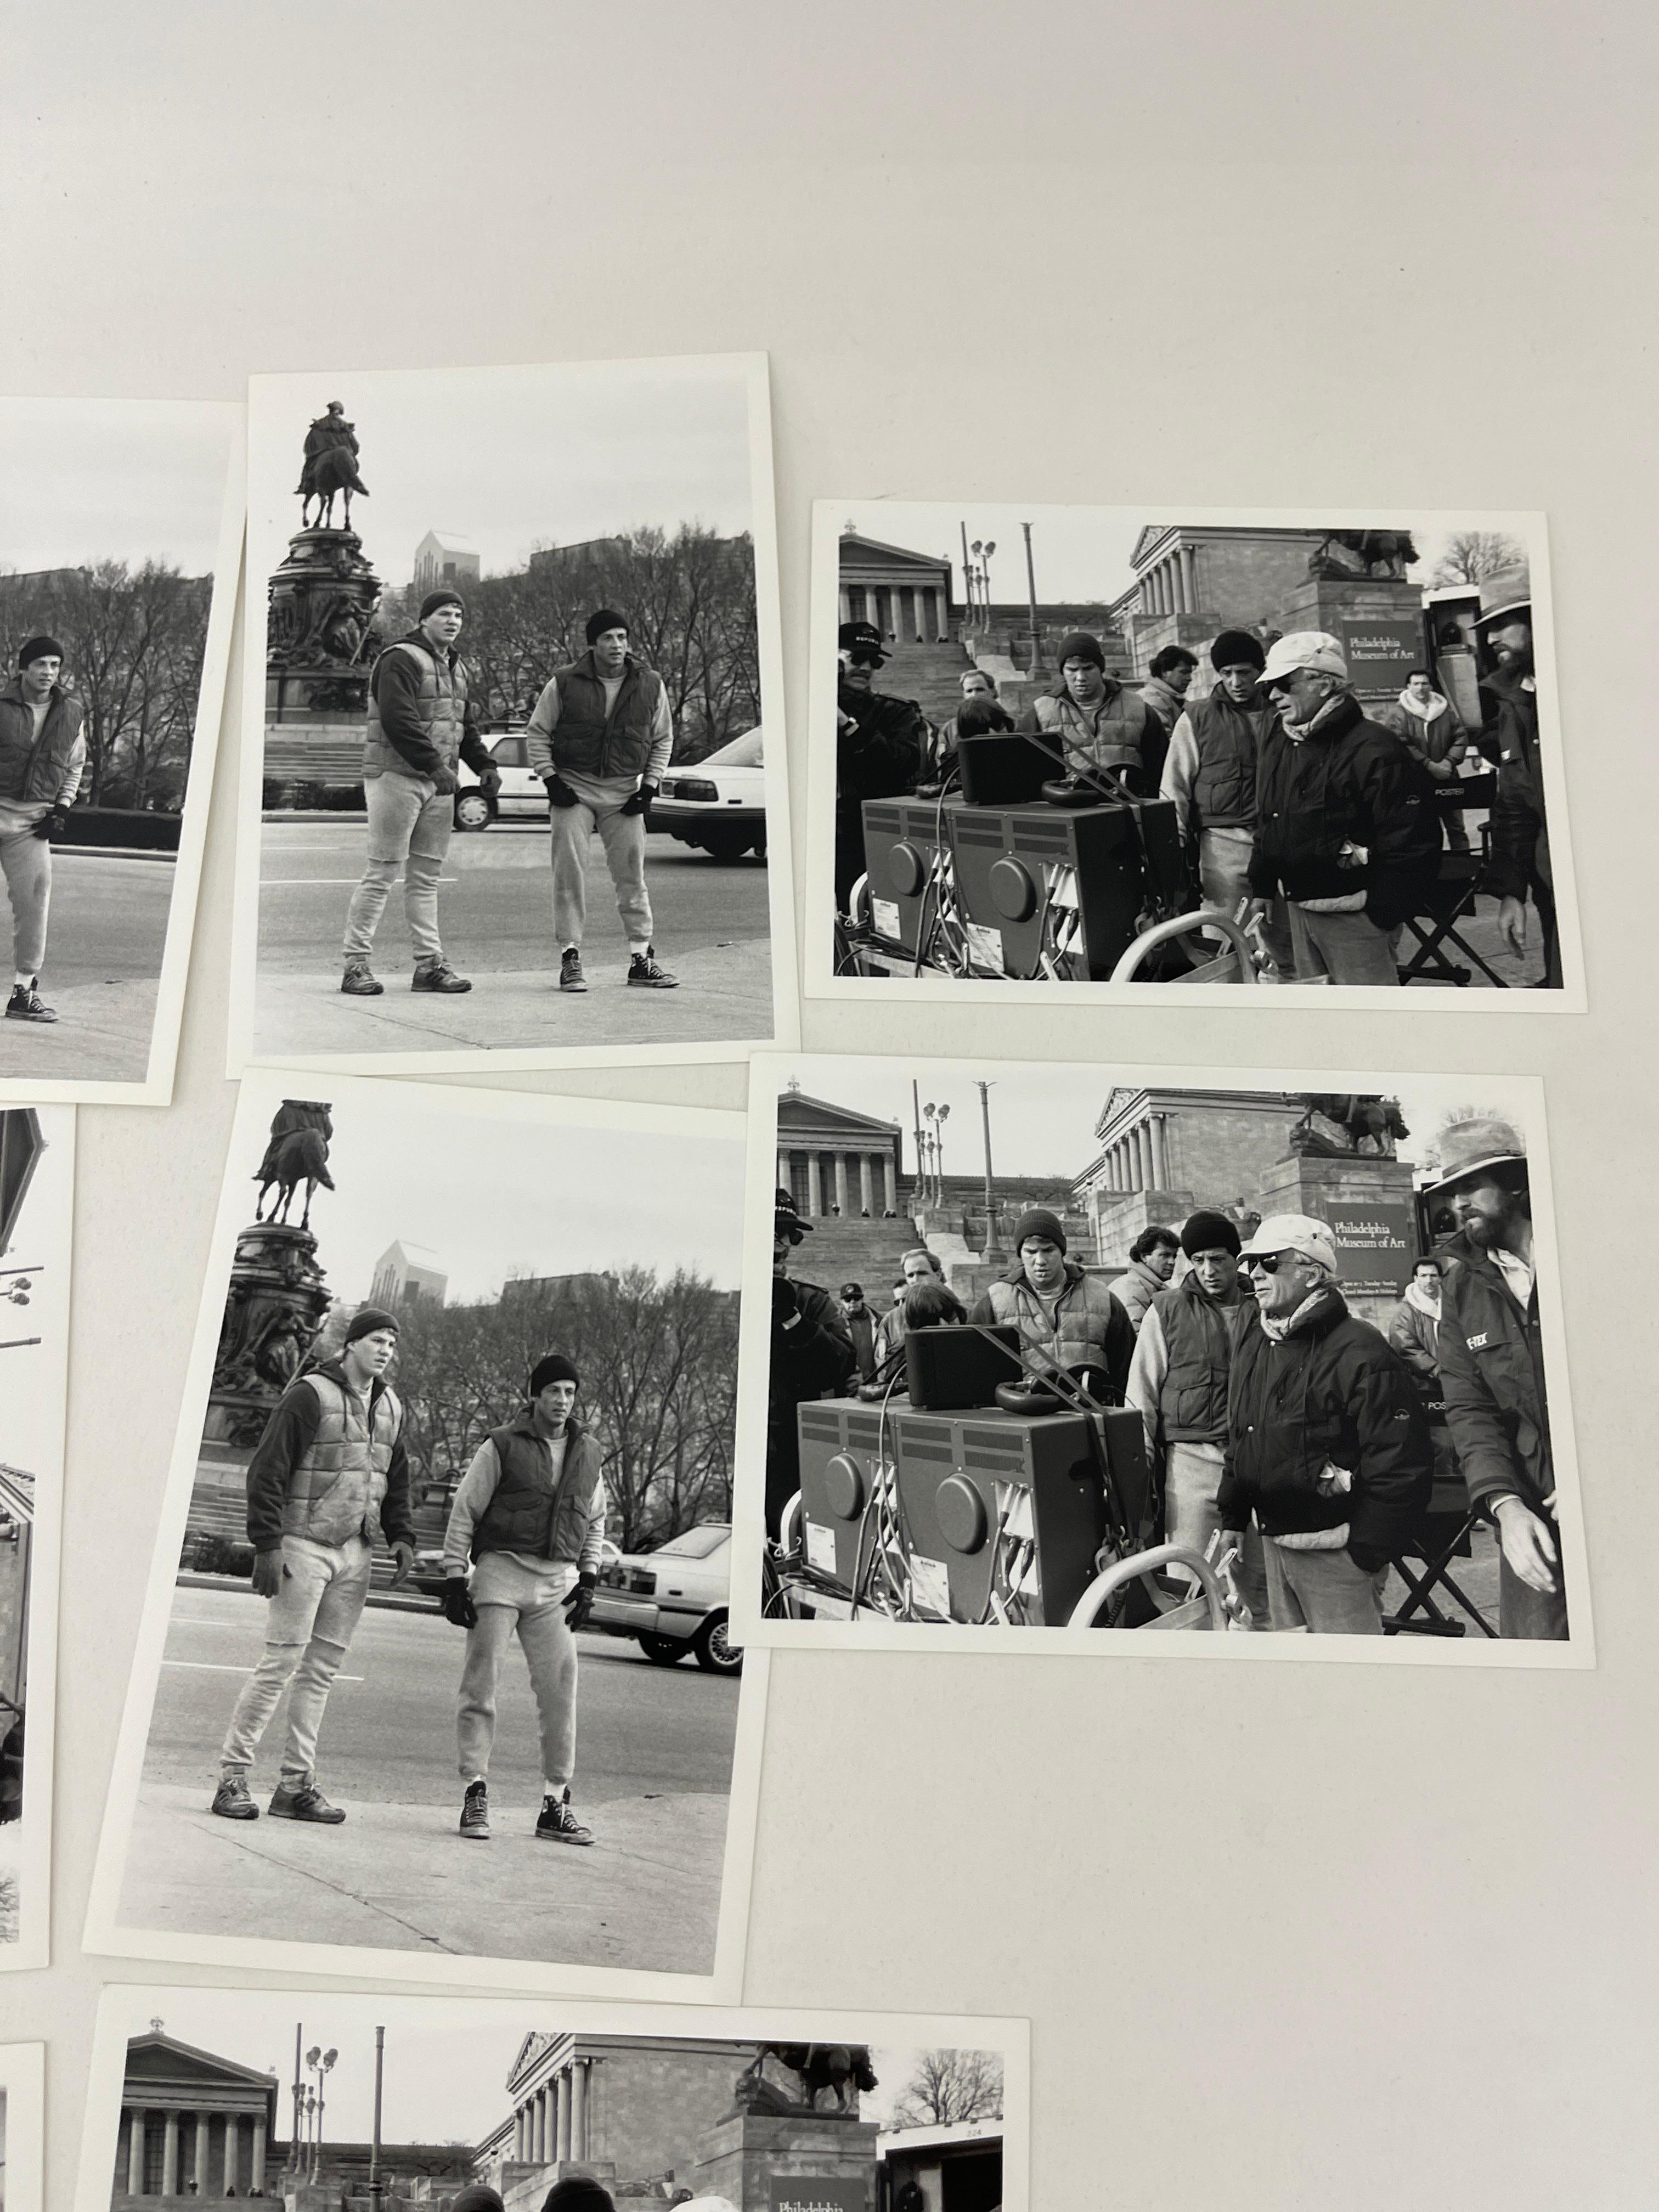 Sylvester Stallone Rocky V Behind the Scenes Photo Lot 10